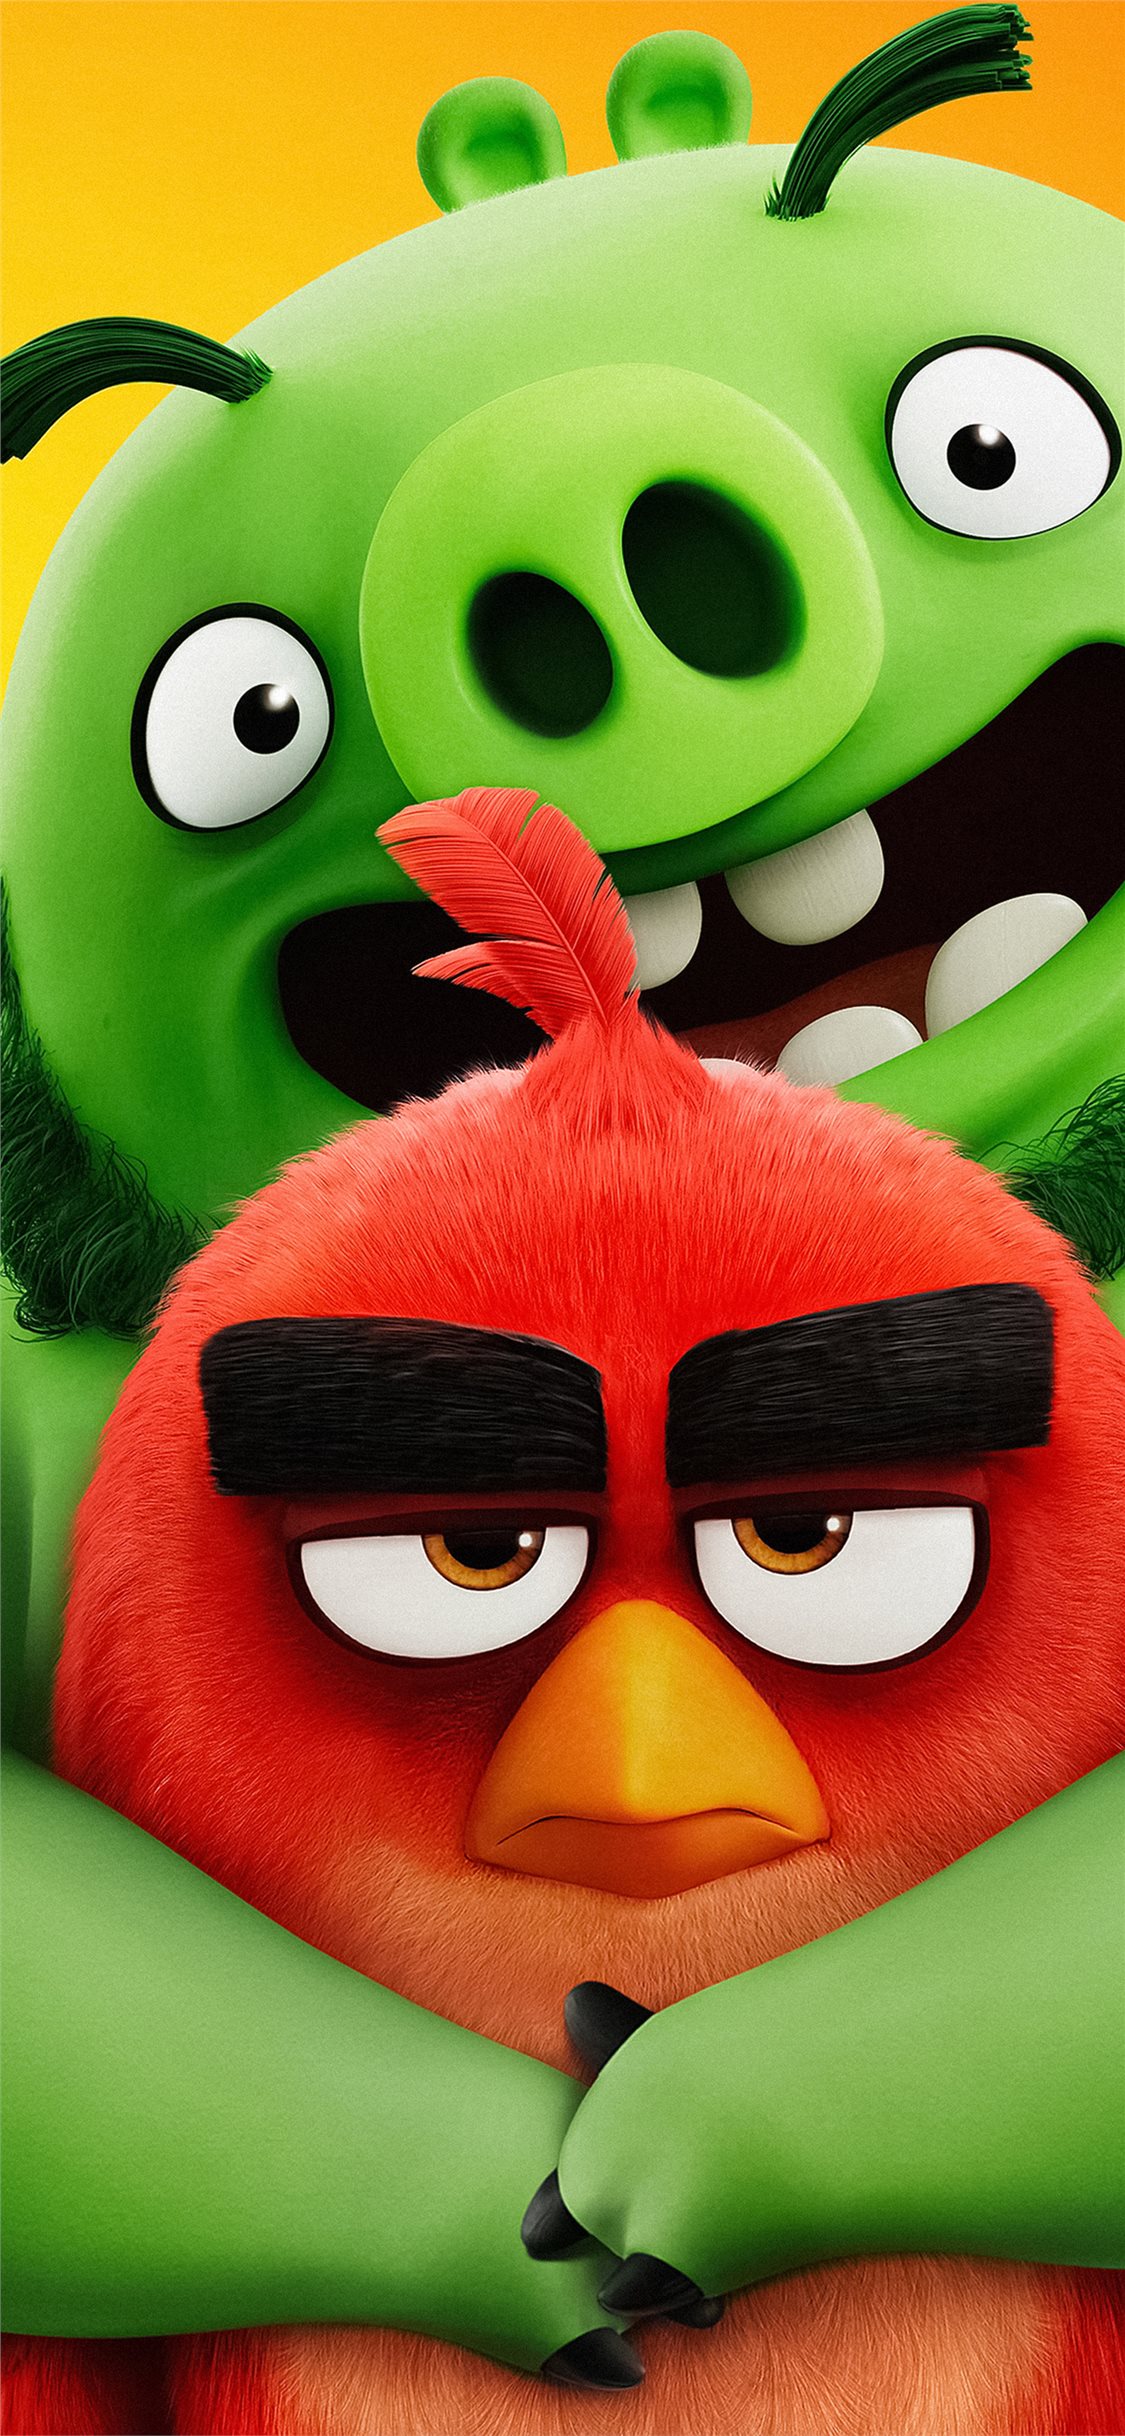 The Angry Birds Movie 2 19 5k New Iphone X Wallpapers Free Download